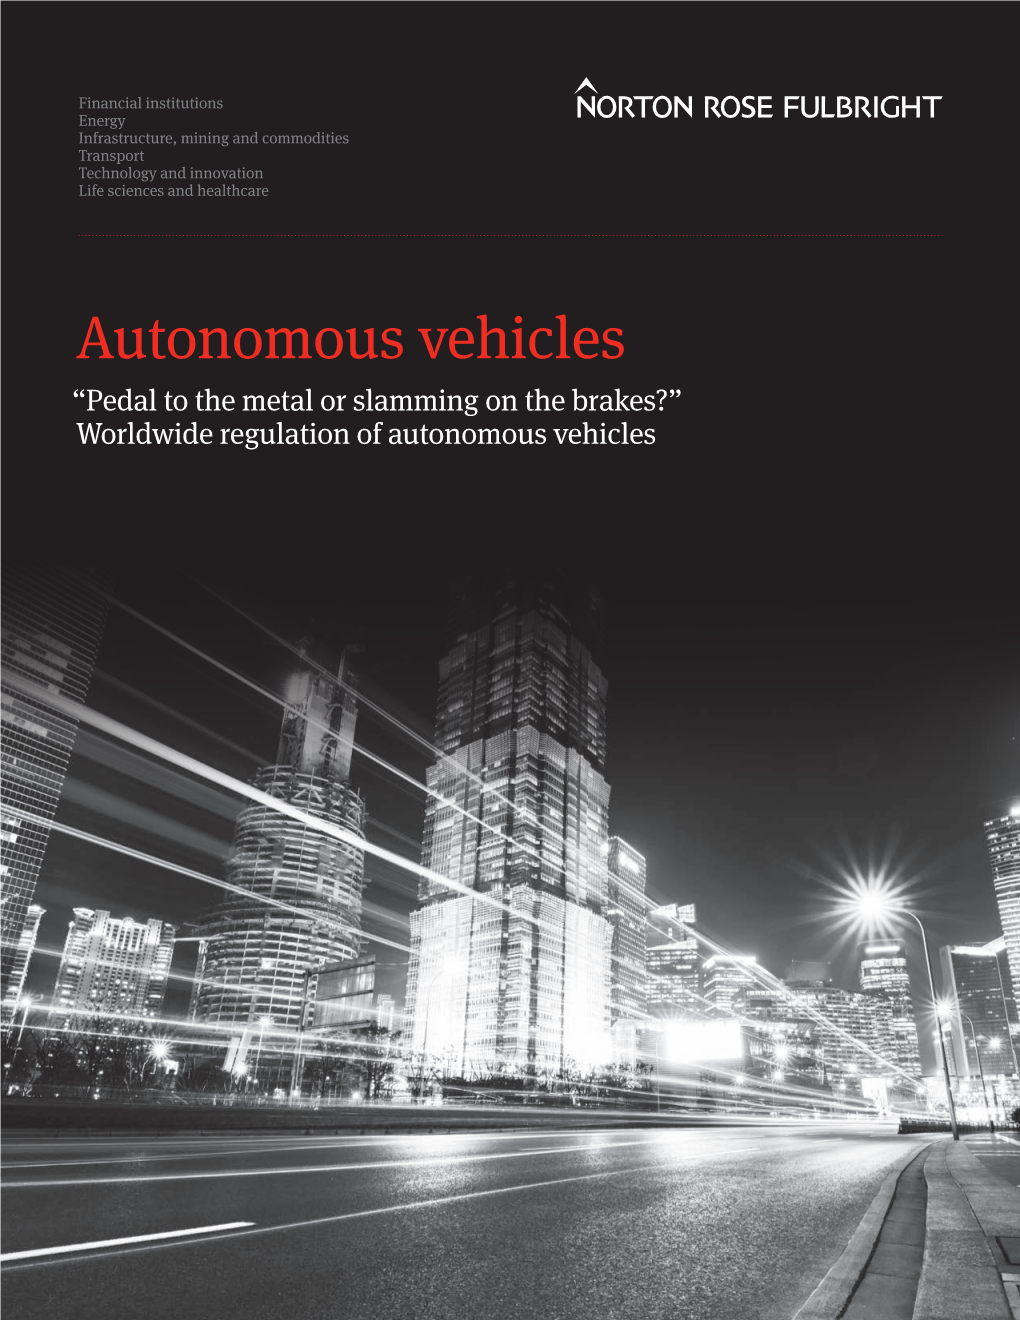 Autonomous Vehicles “Pedal to the Metal Or Slamming on the Brakes?” Worldwide Regulation of Autonomous Vehicles Norton Rose Fulbright: Where Can We Take You Today?